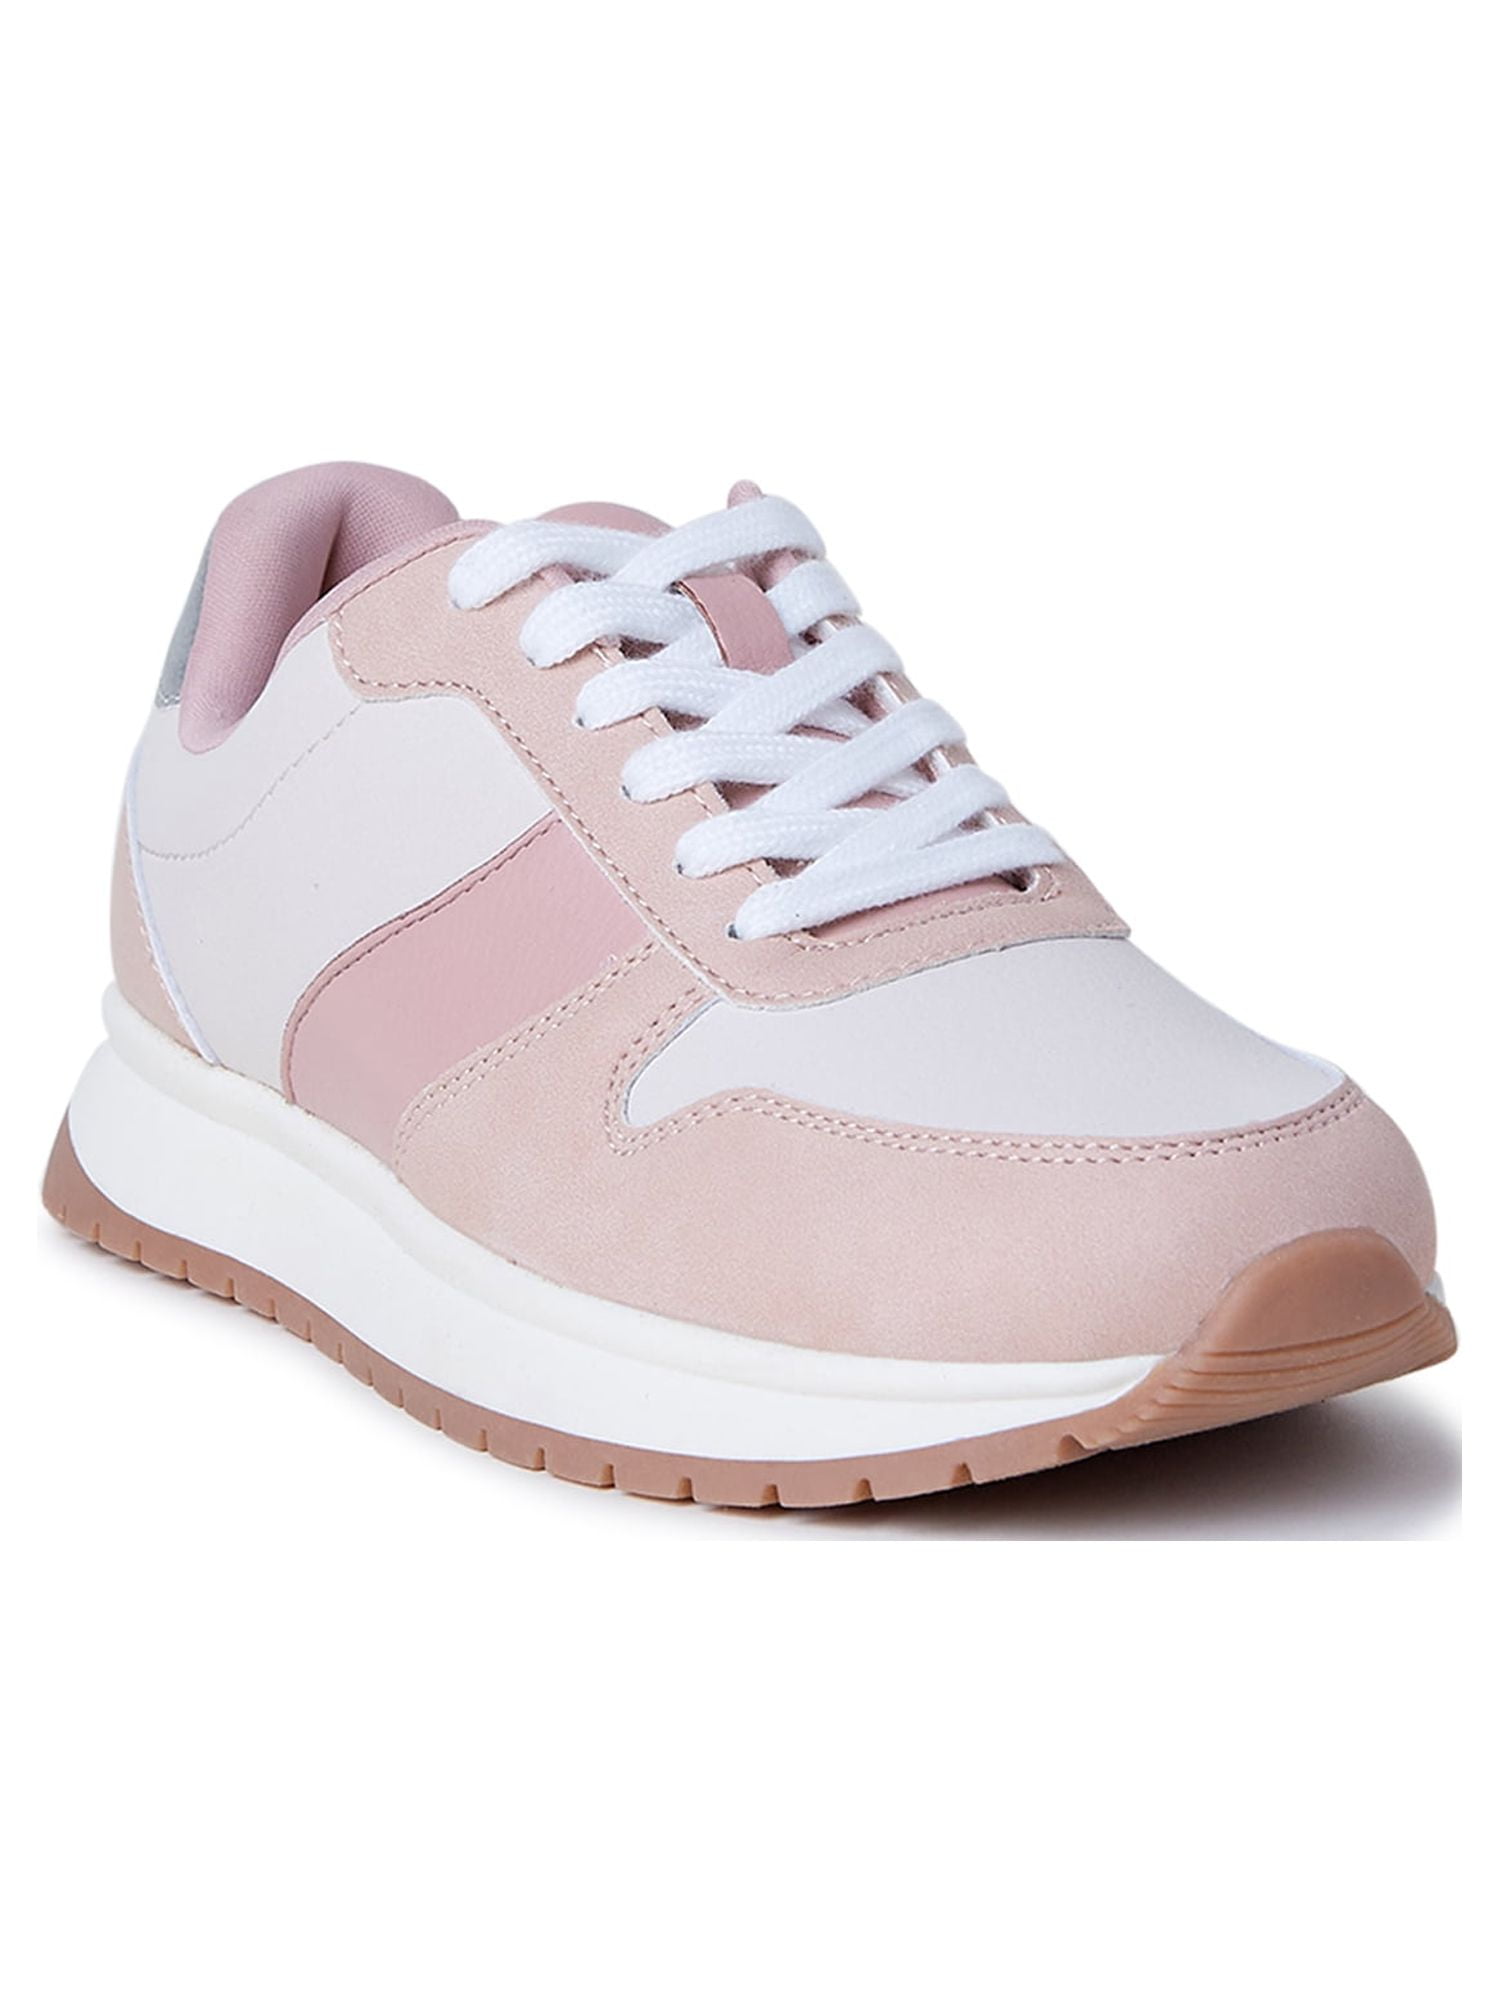 Chunky Pink Women's Sneakers, Chunky Sneakers Woman Pink